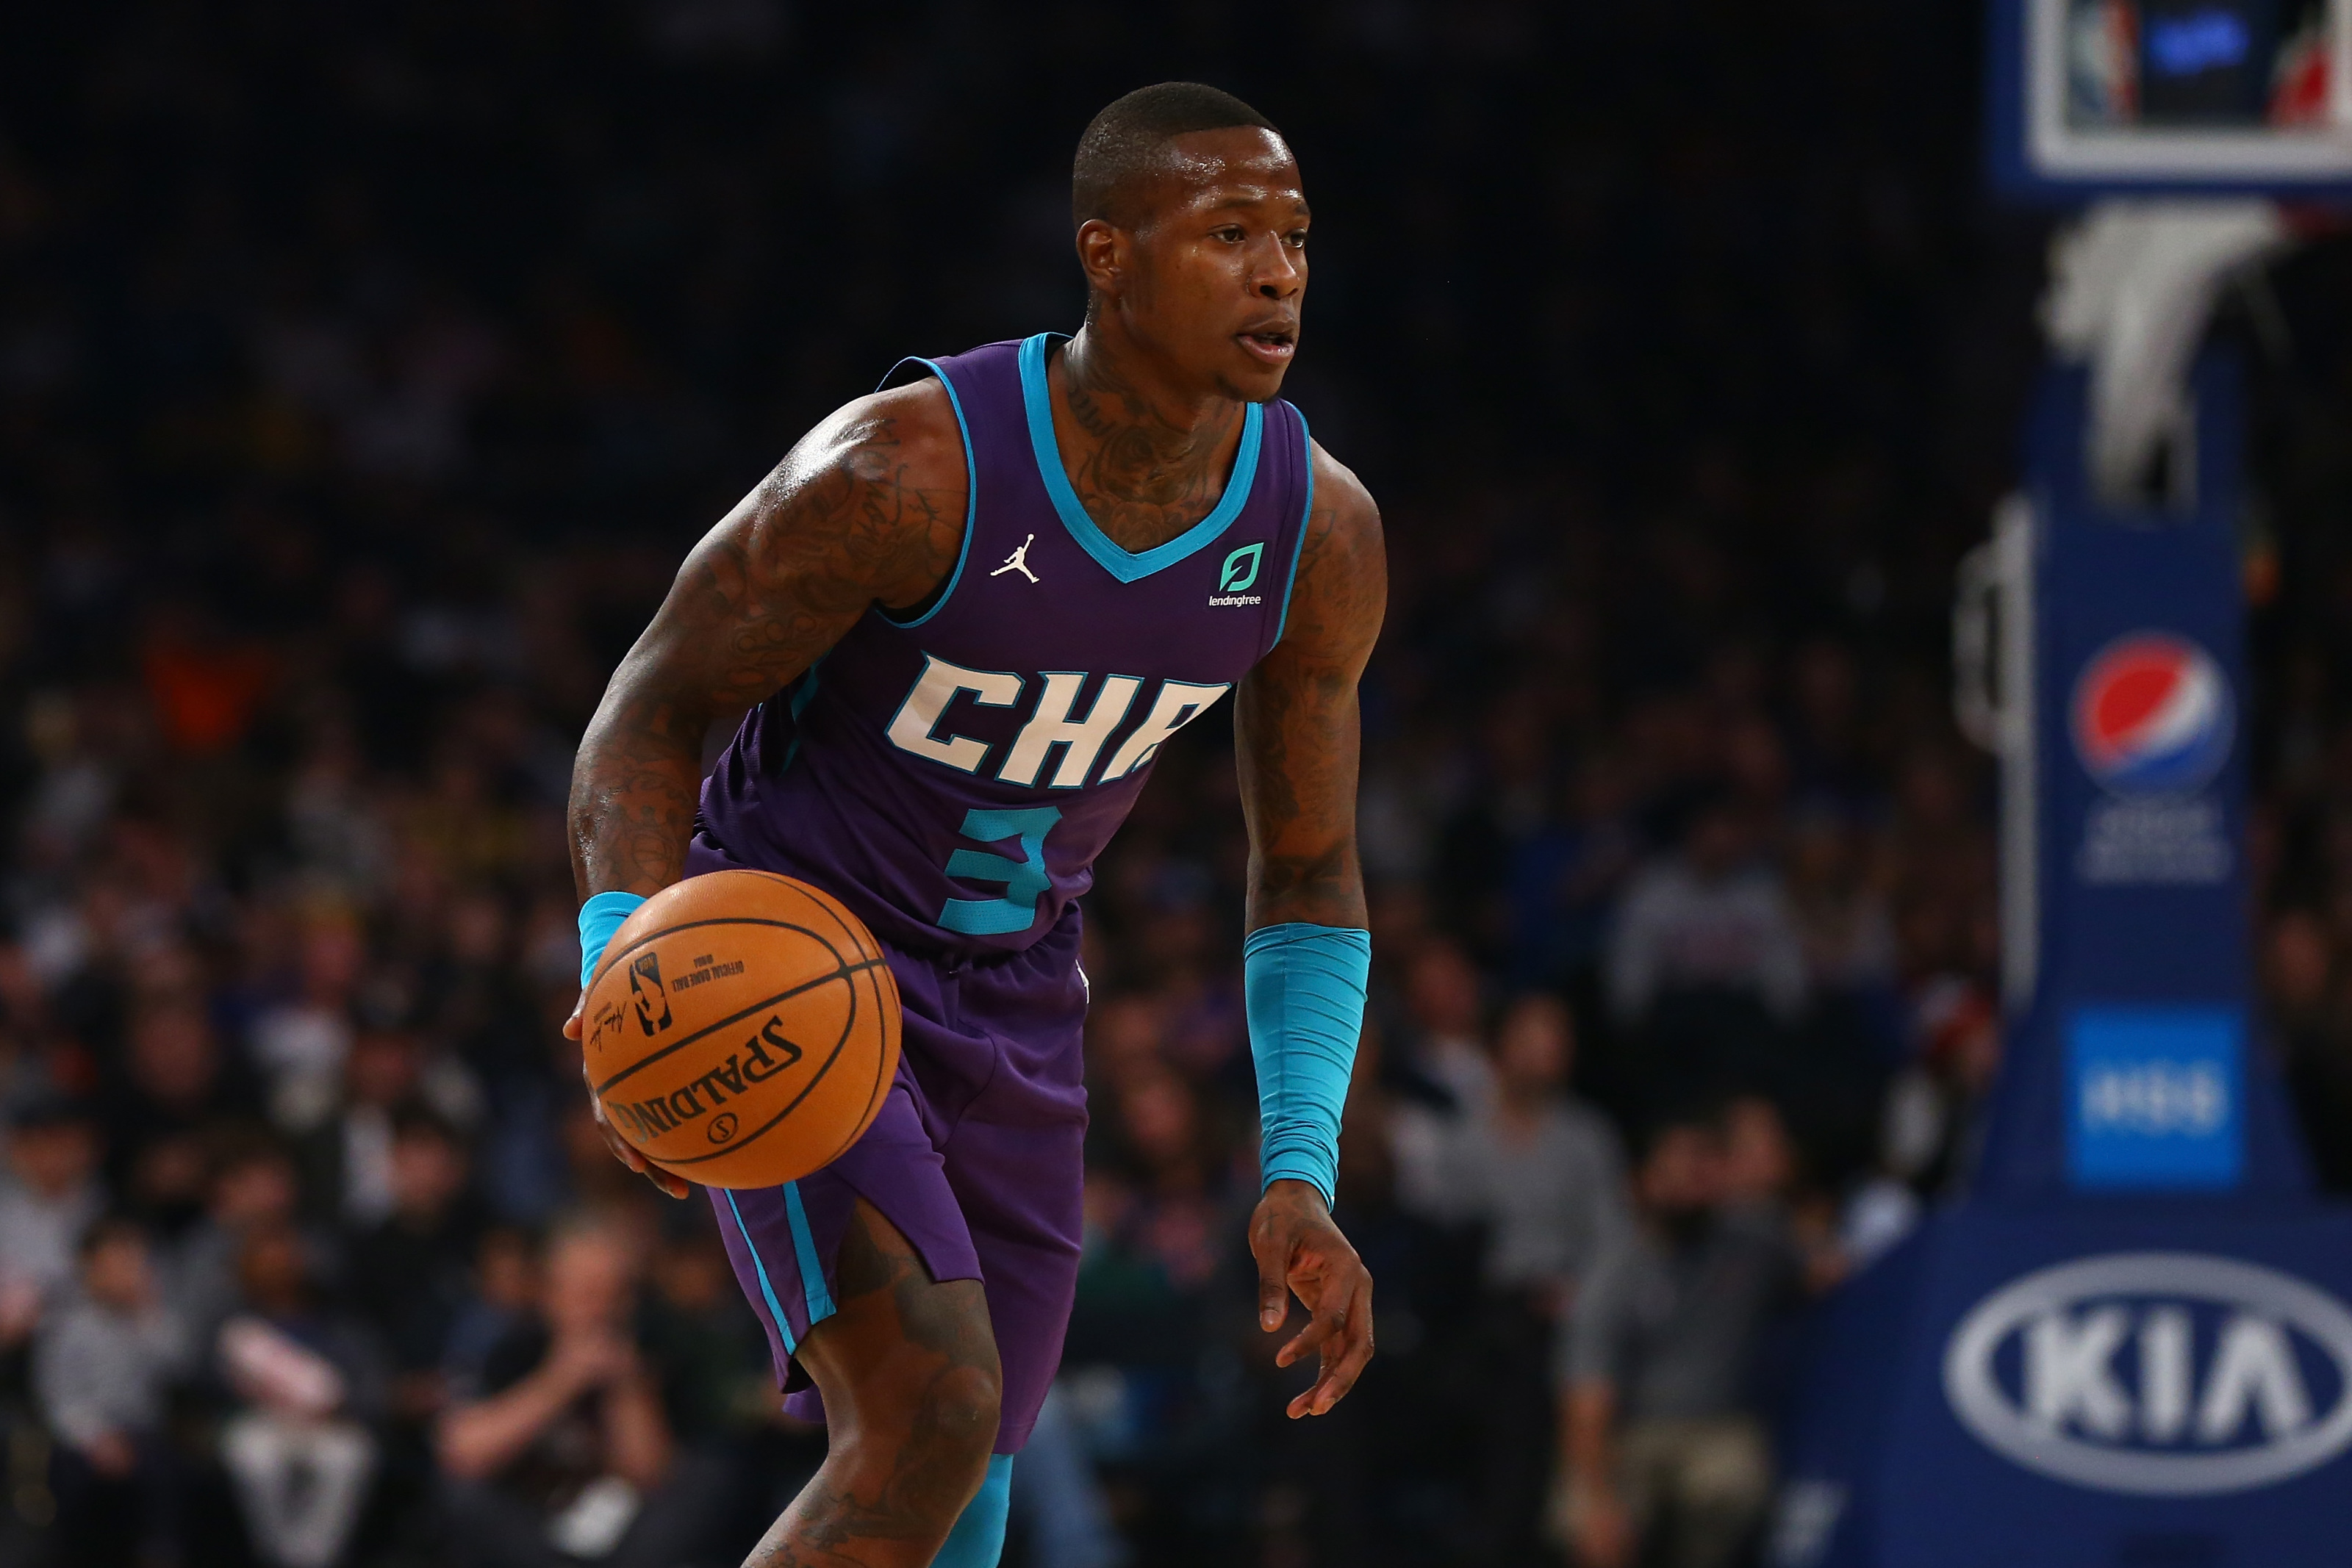 Terry Rozier of the Charlotte Hornets shoots a free throw against